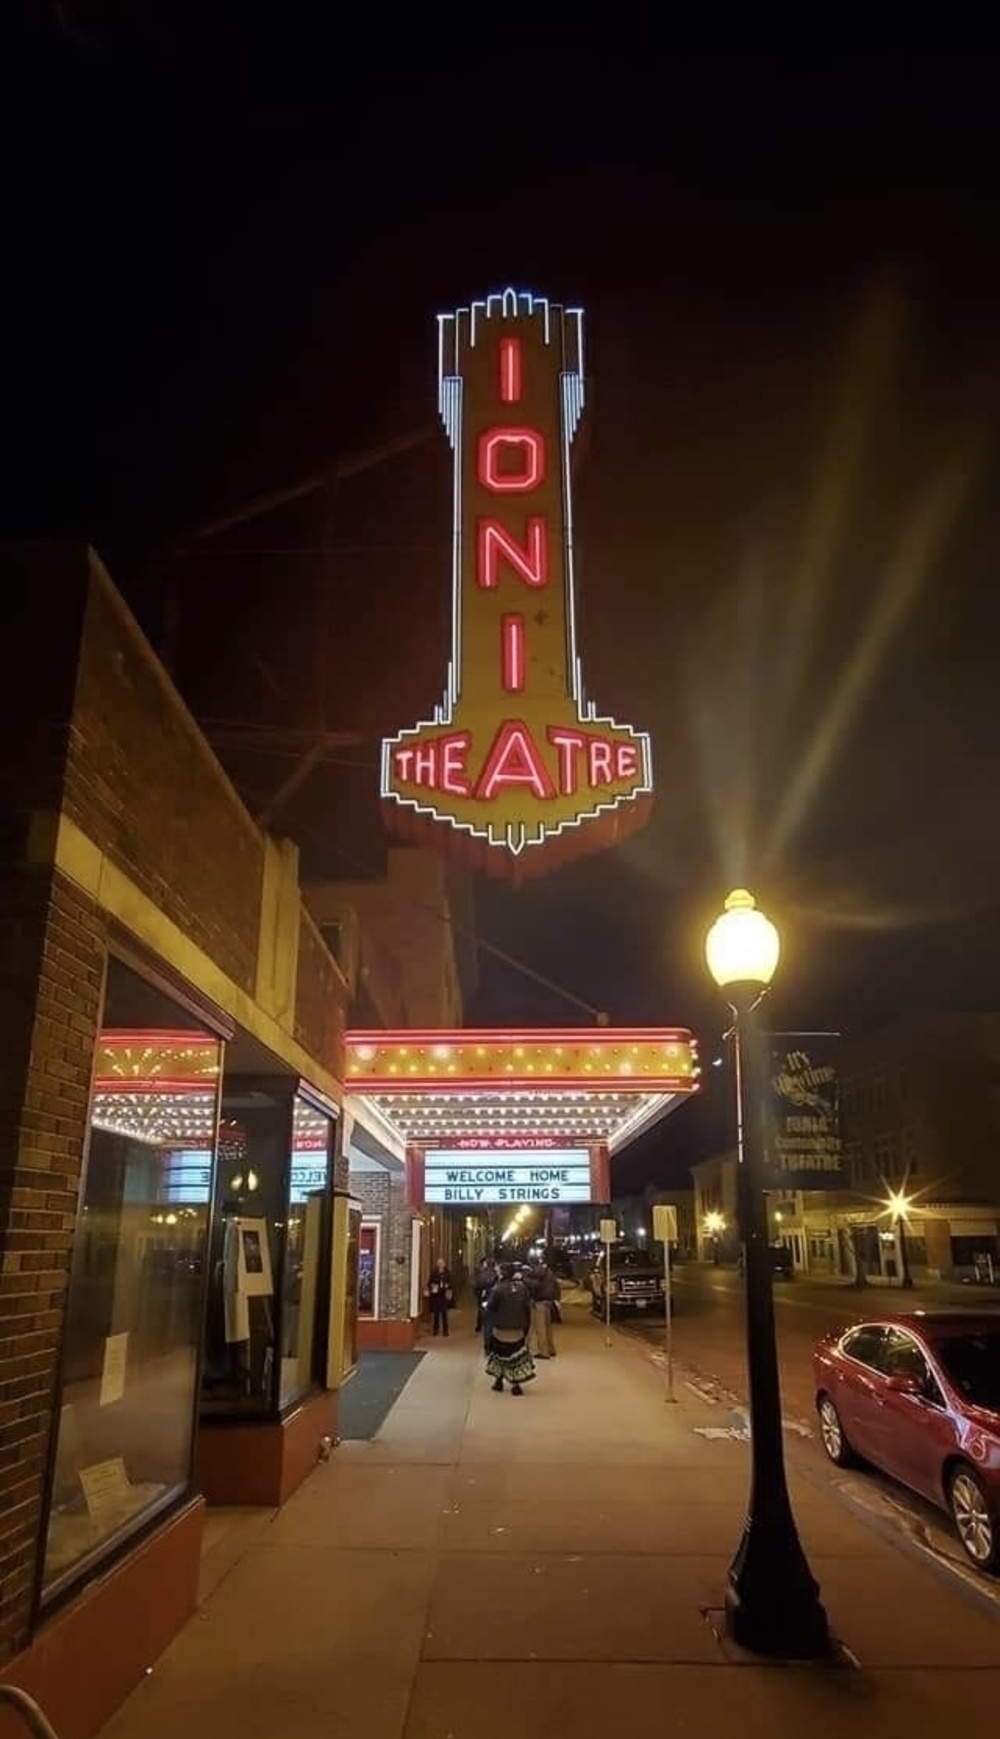 Neon-lit theater marquee at night reads &ldquo;IONIA THEATRE&rdquo; with &ldquo;WELCOME HOME BILLY STRINGS&rdquo; on a lower sign, flanked by street lights and a pedestrian sidewalk.